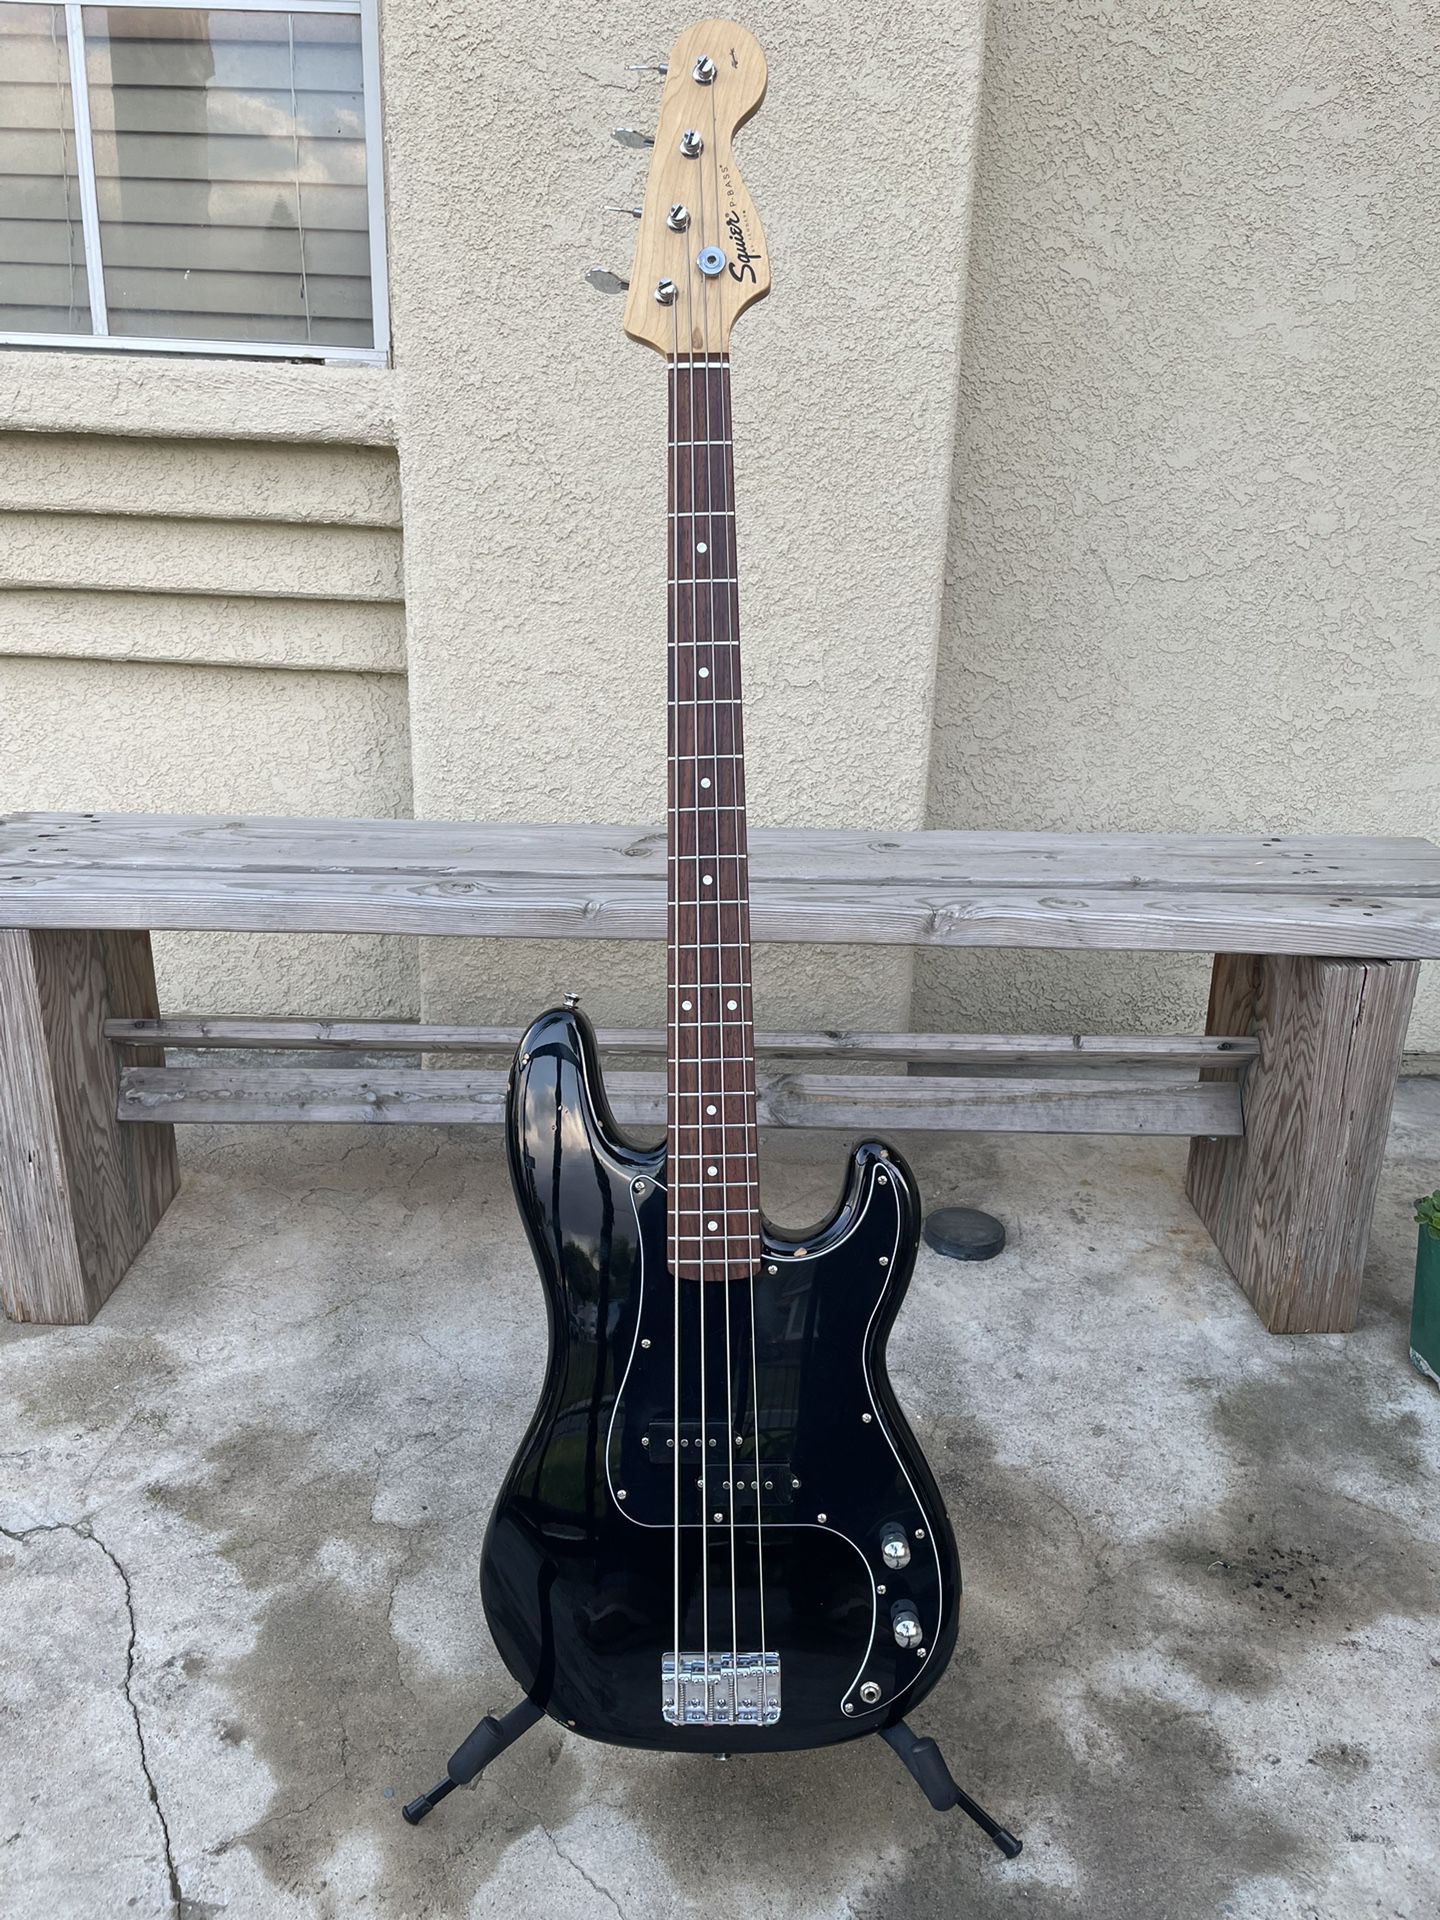 Beautiful Fender Squier P-bass For Sale